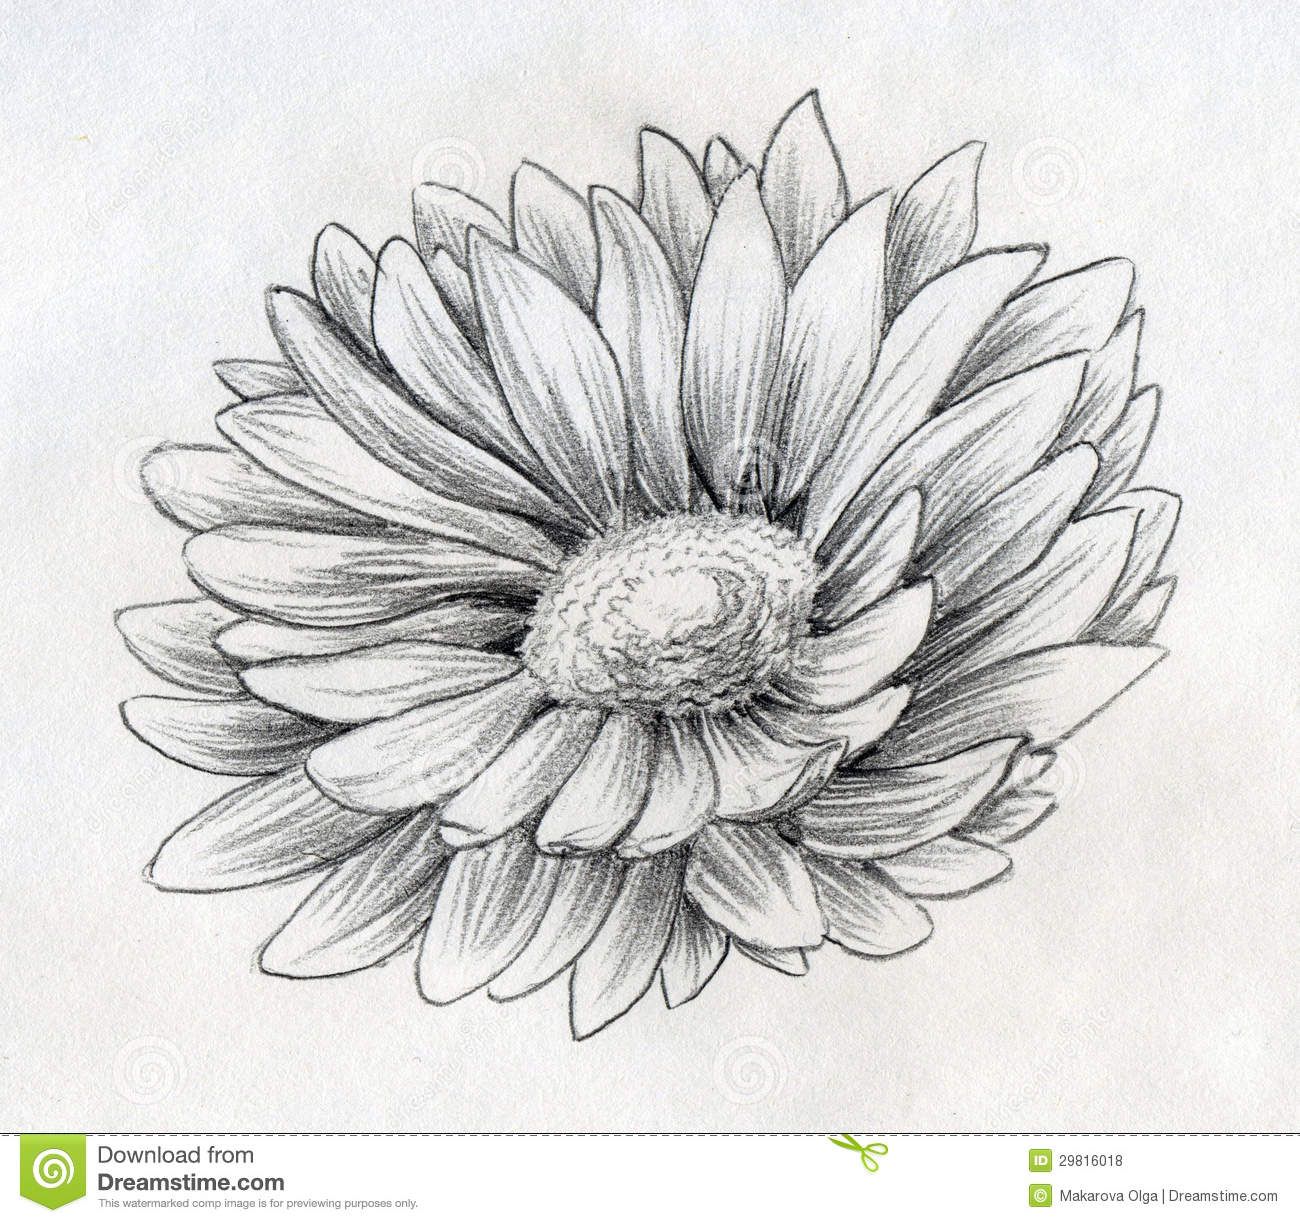 Daisy Sketch Tattoo at Explore collection of Daisy